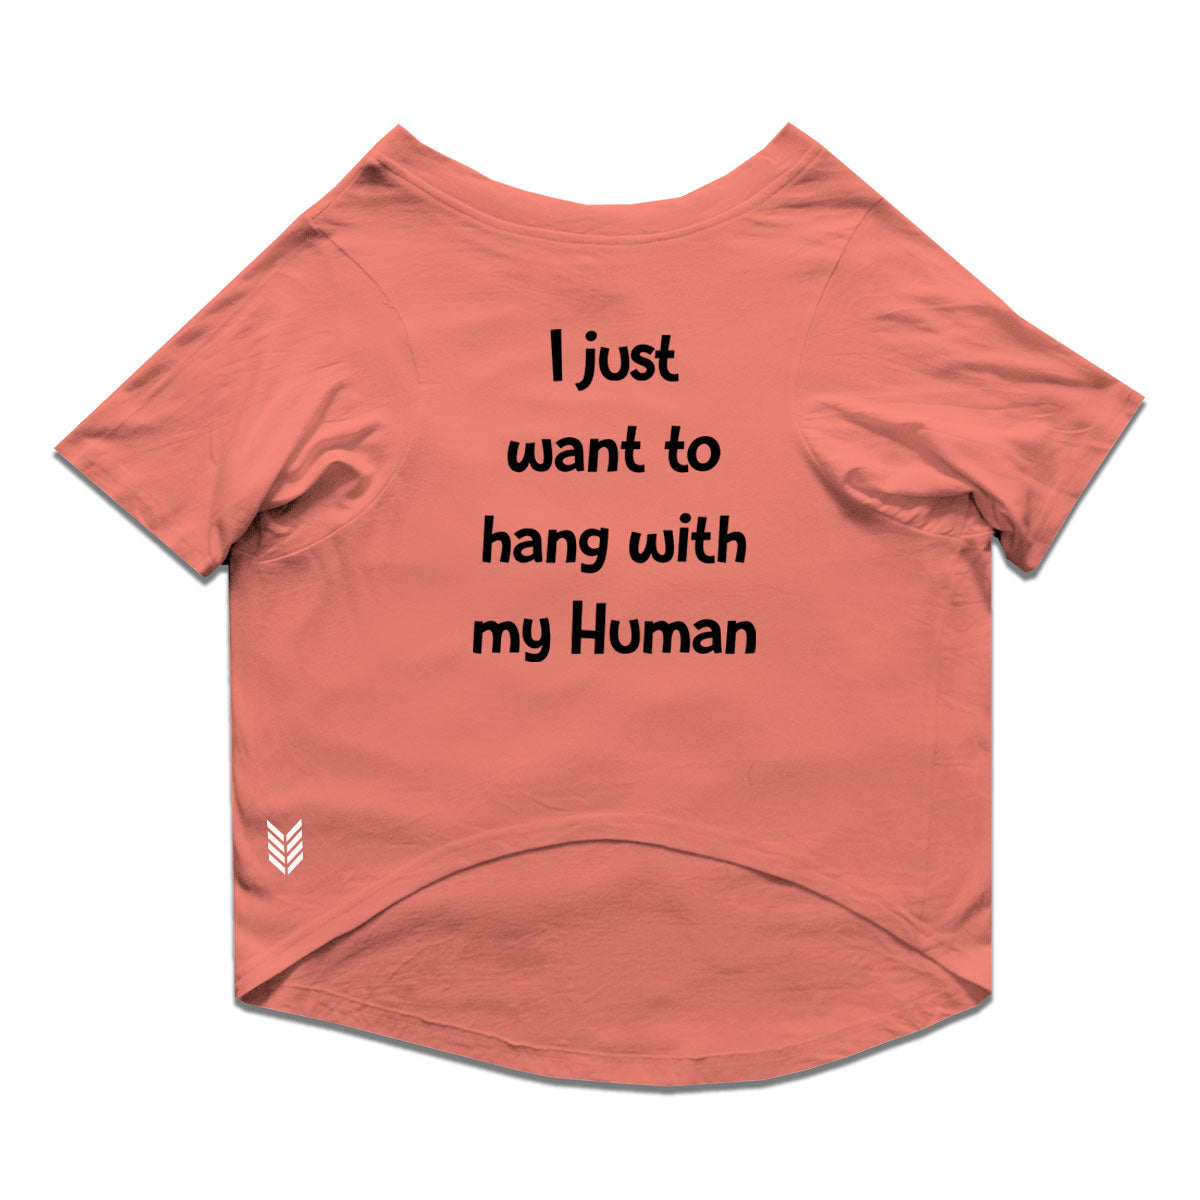 Ruse / i-just-want-to-hang-with-my-human-crew-neck-dog-tee / Salmon